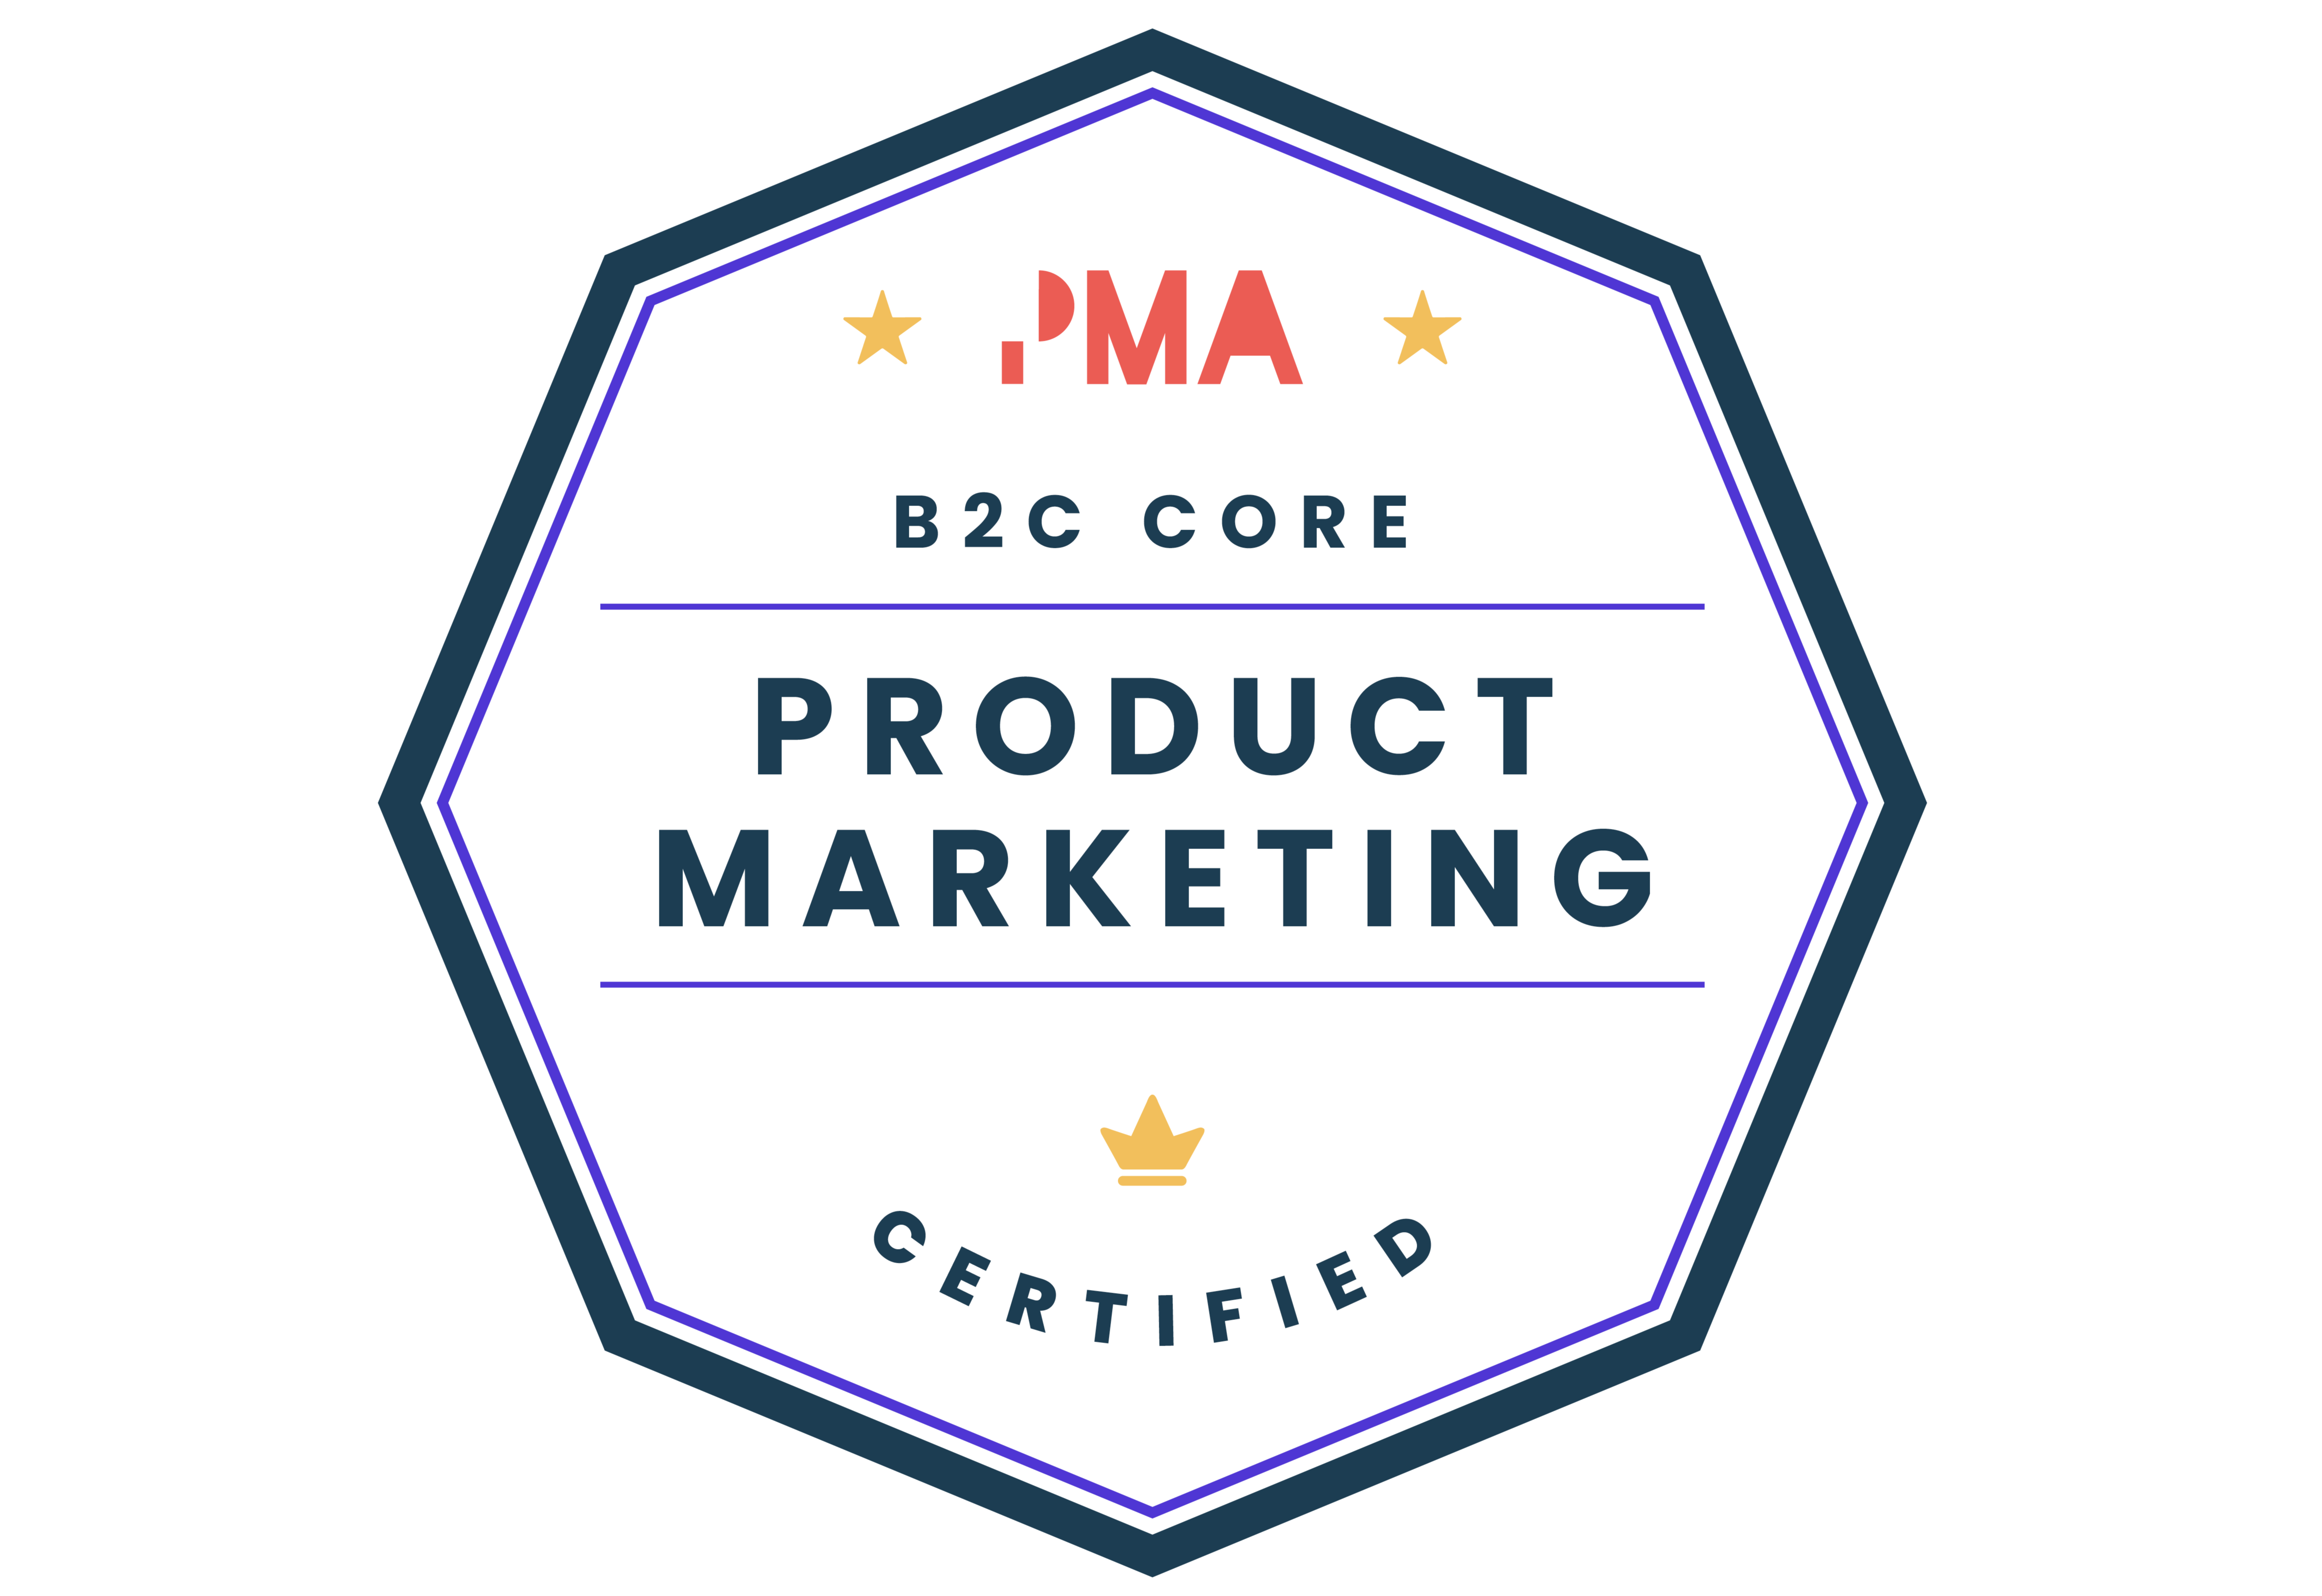 Product Marketing Certified: B2C Core badge